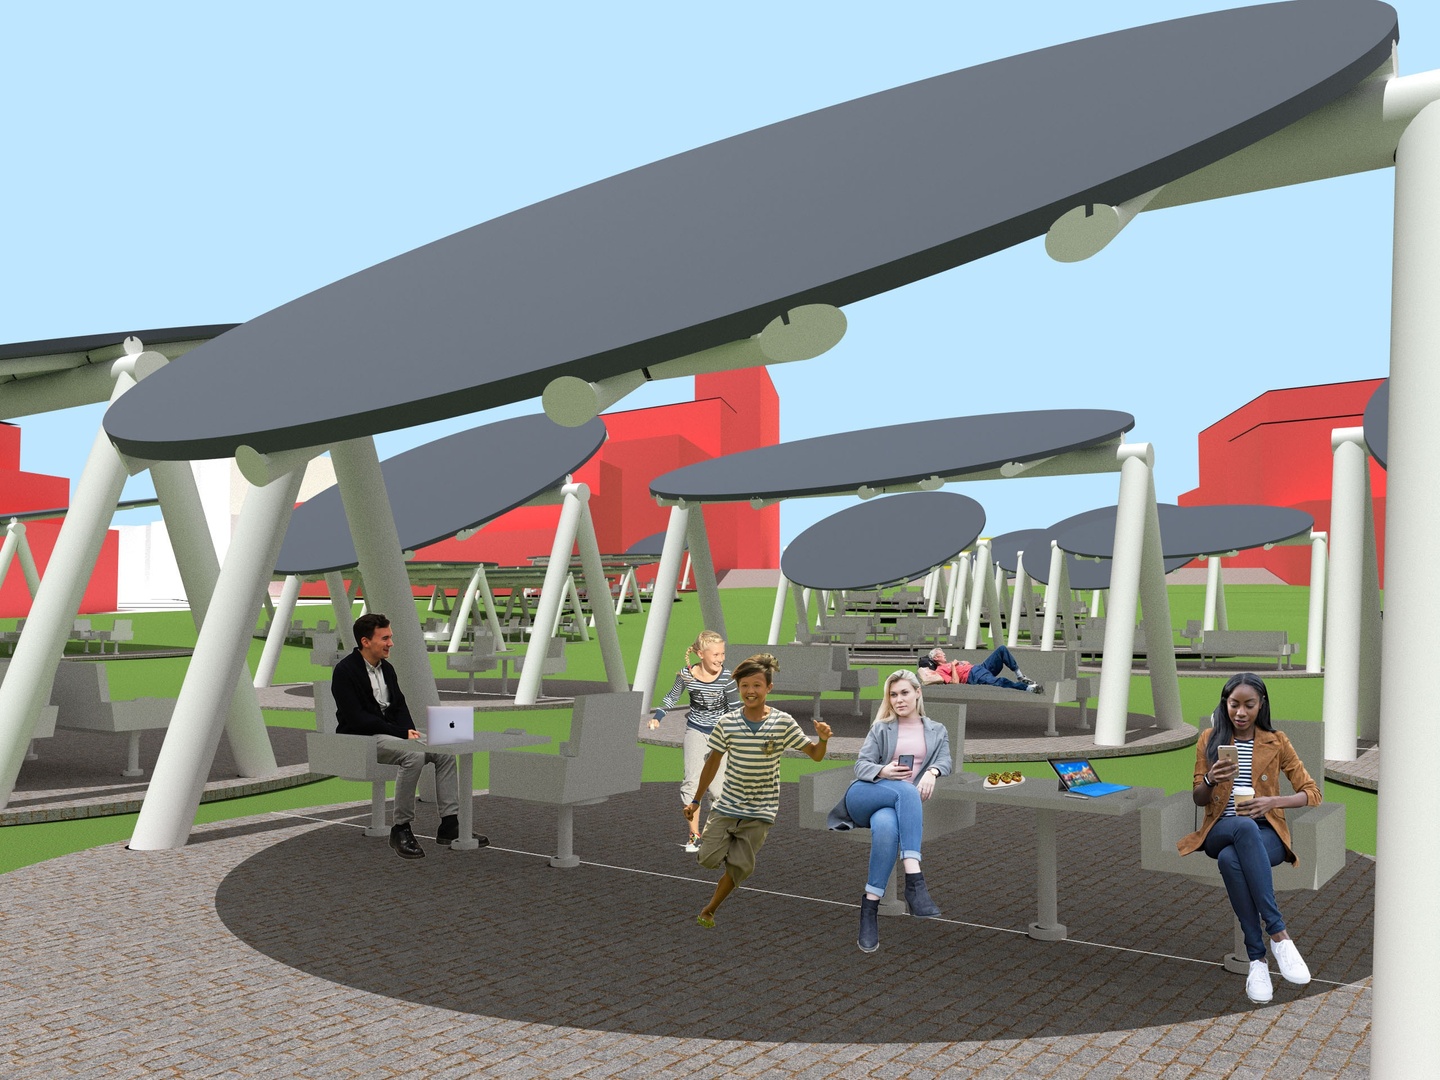 Rendering of people outside underneath a series of ovular gray canopies, many sitting on gray furniture underneath. 